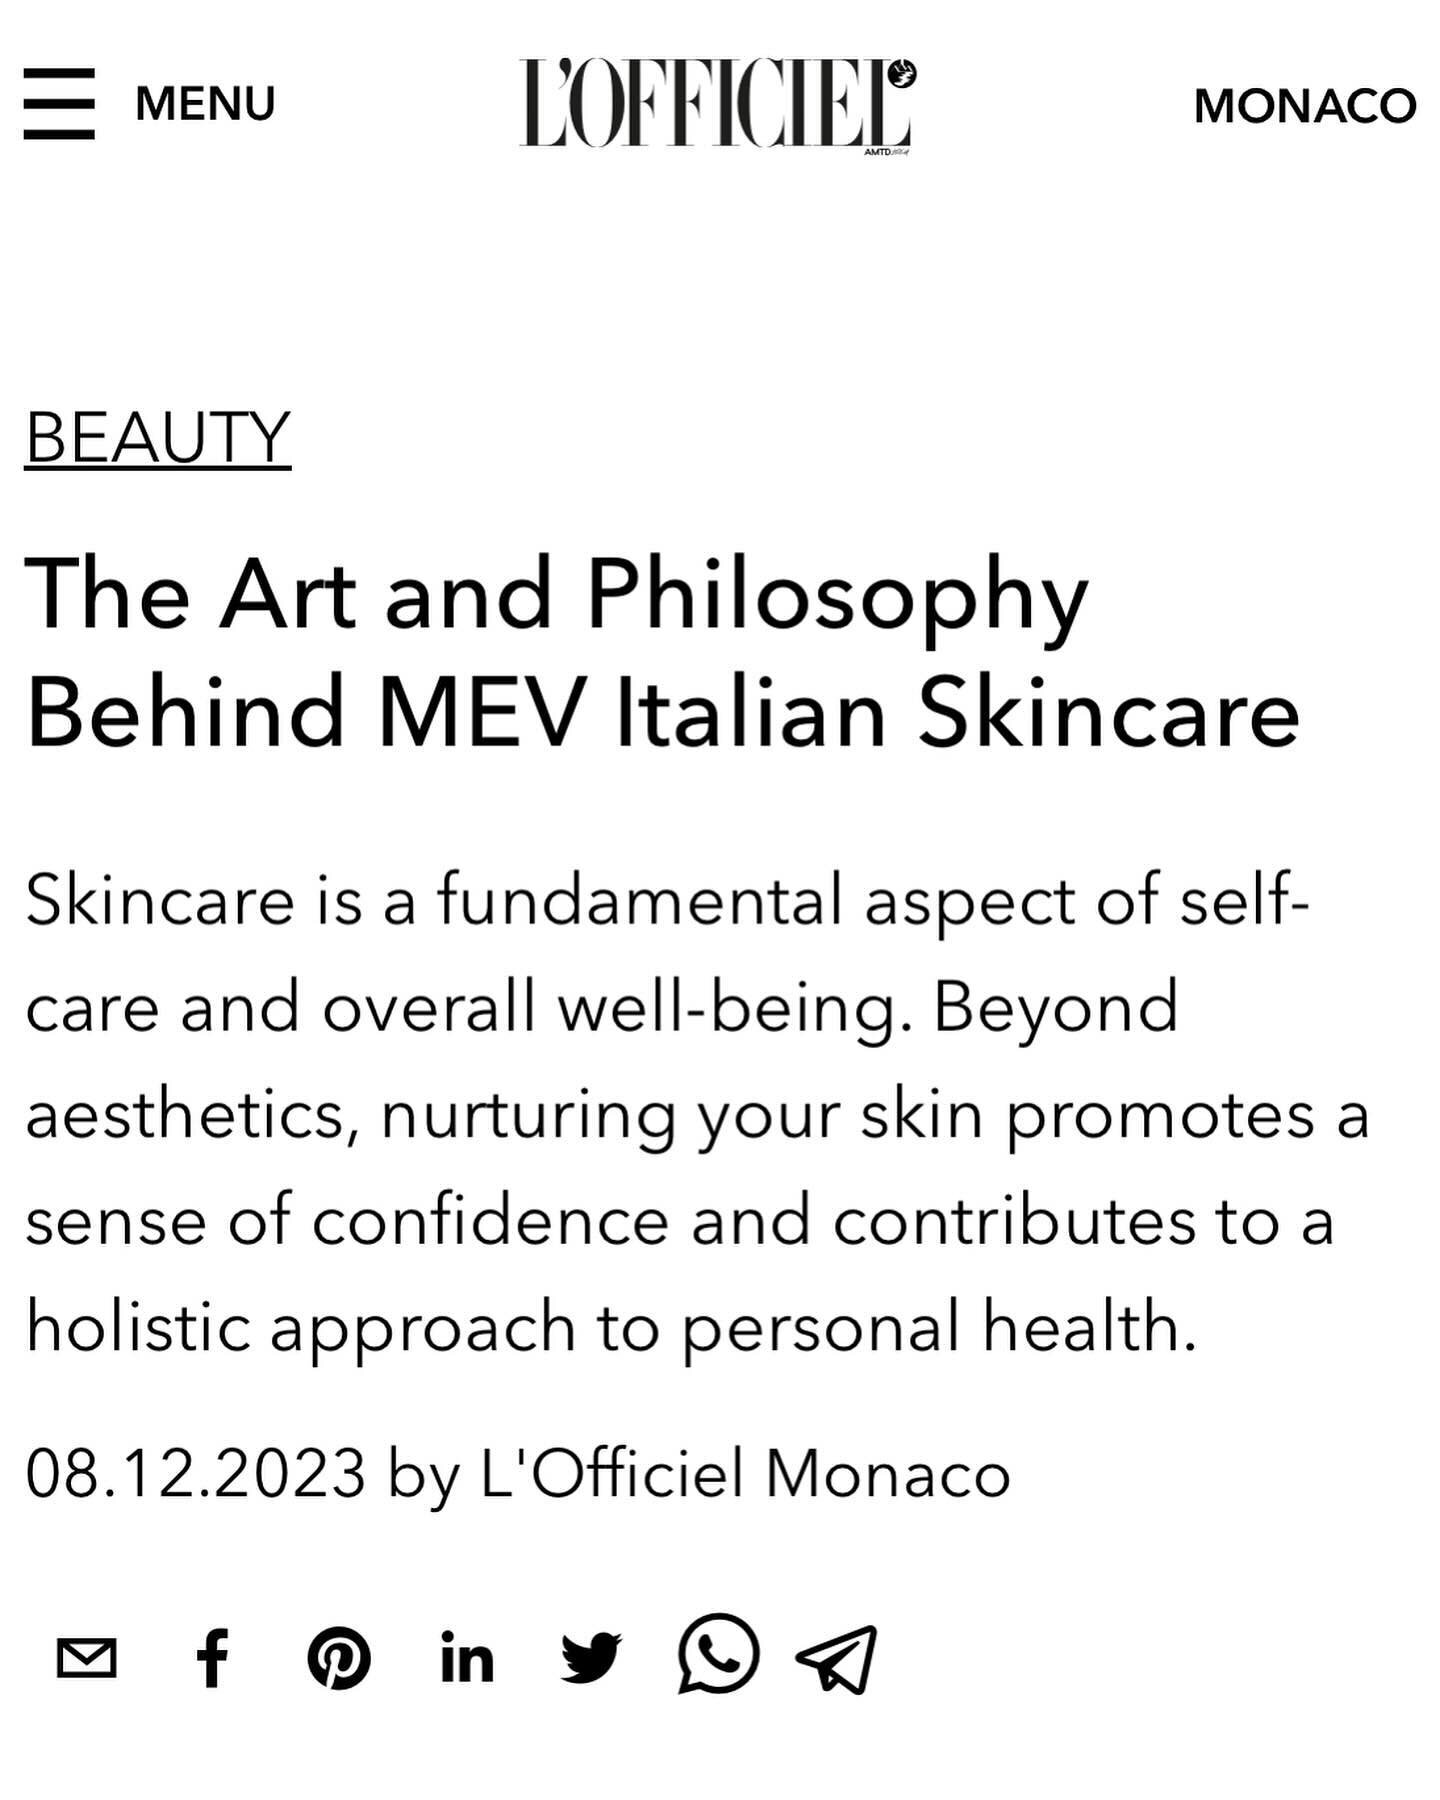 We are so proud to see MEV Skincare featured on @lofficielmonaco! 🌟 It&rsquo;s a testament to our commitment to beauty and wellness. 
Join us on this exciting journey by clicking the link in our bio. 
Thank you for the recognition and for the articl